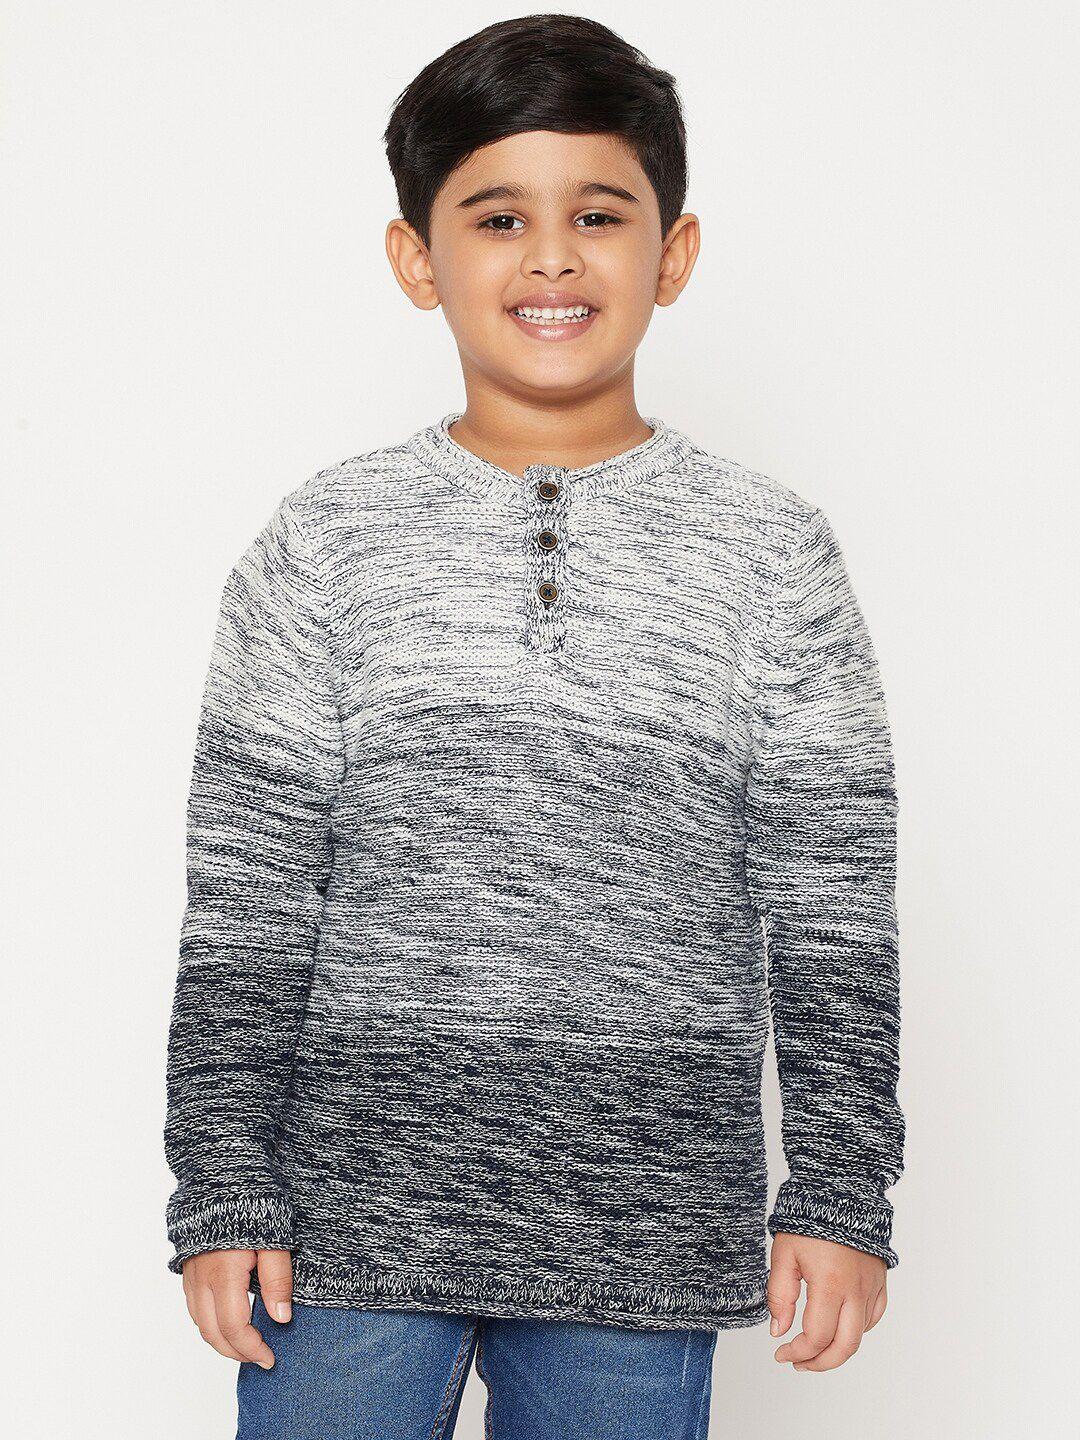 jwaaq boys white & grey ombre pullover